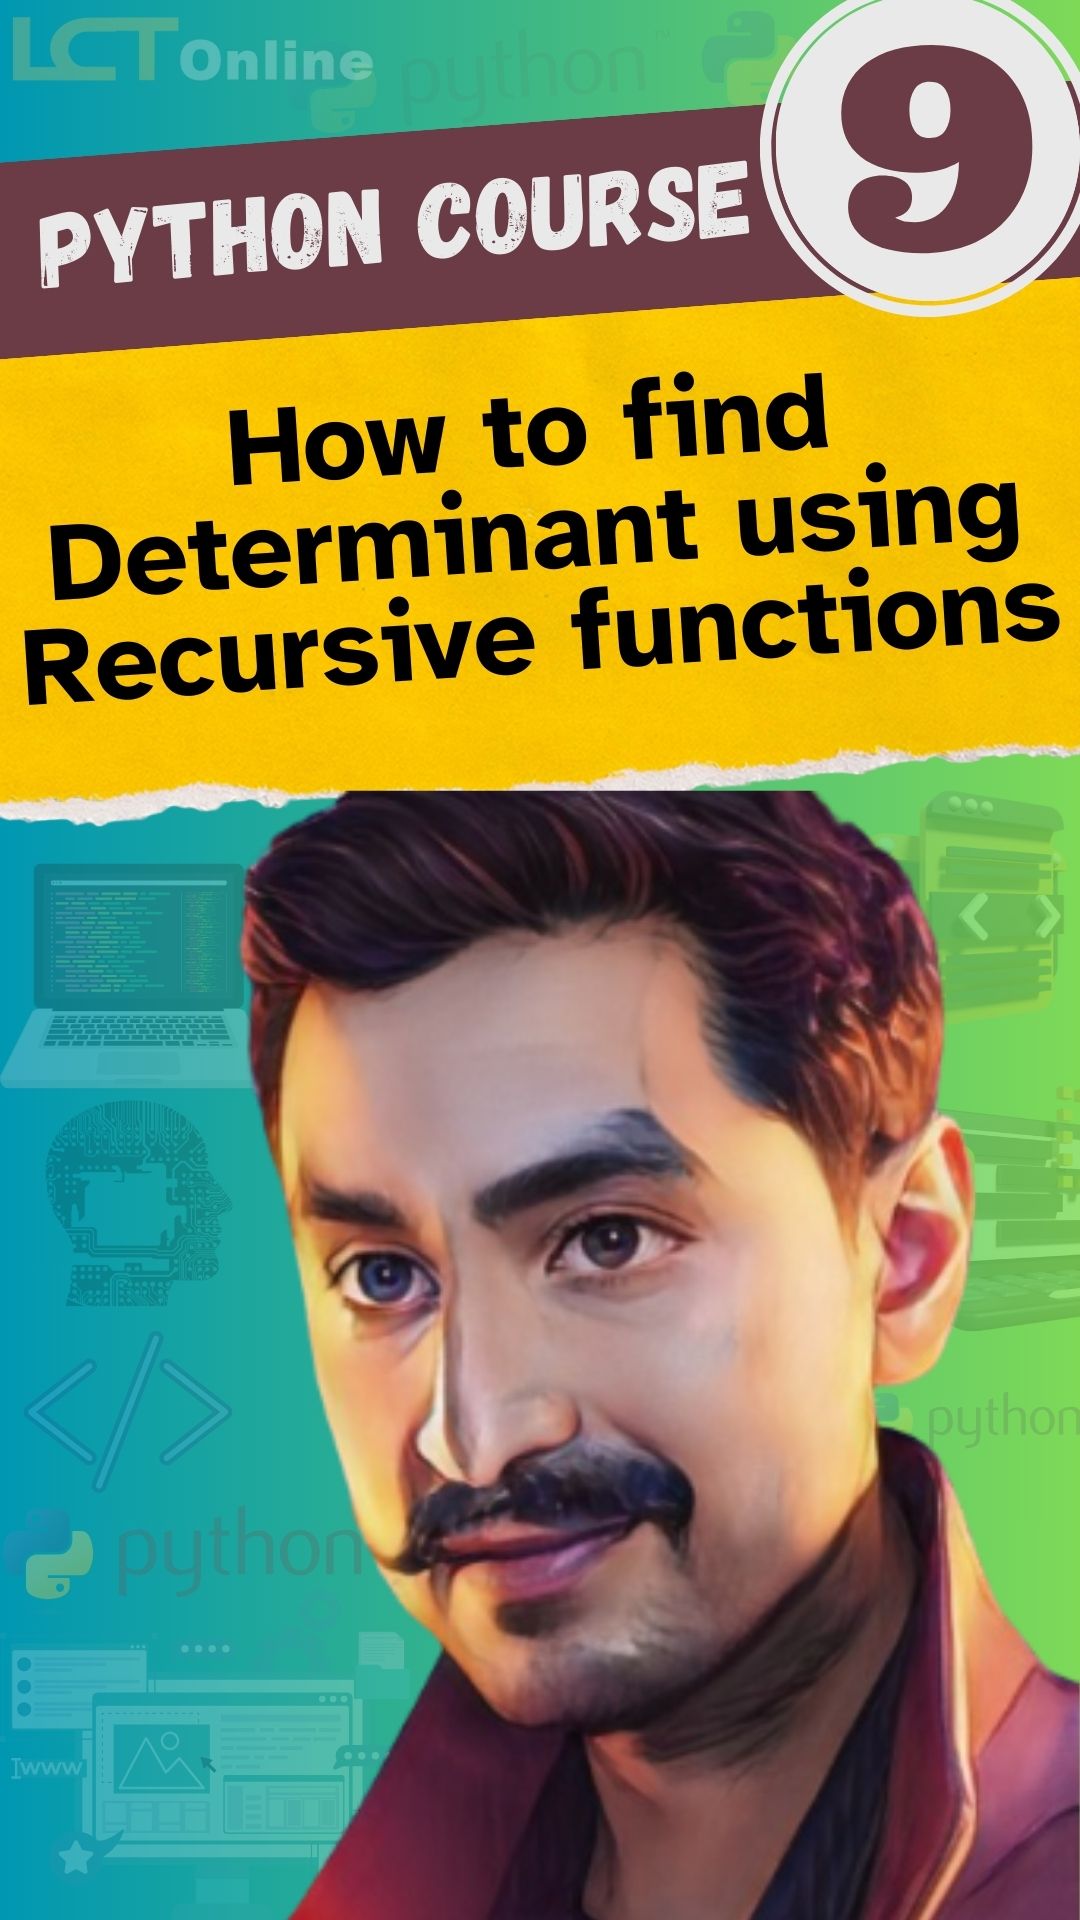 How to find Determinant using Recursive functions